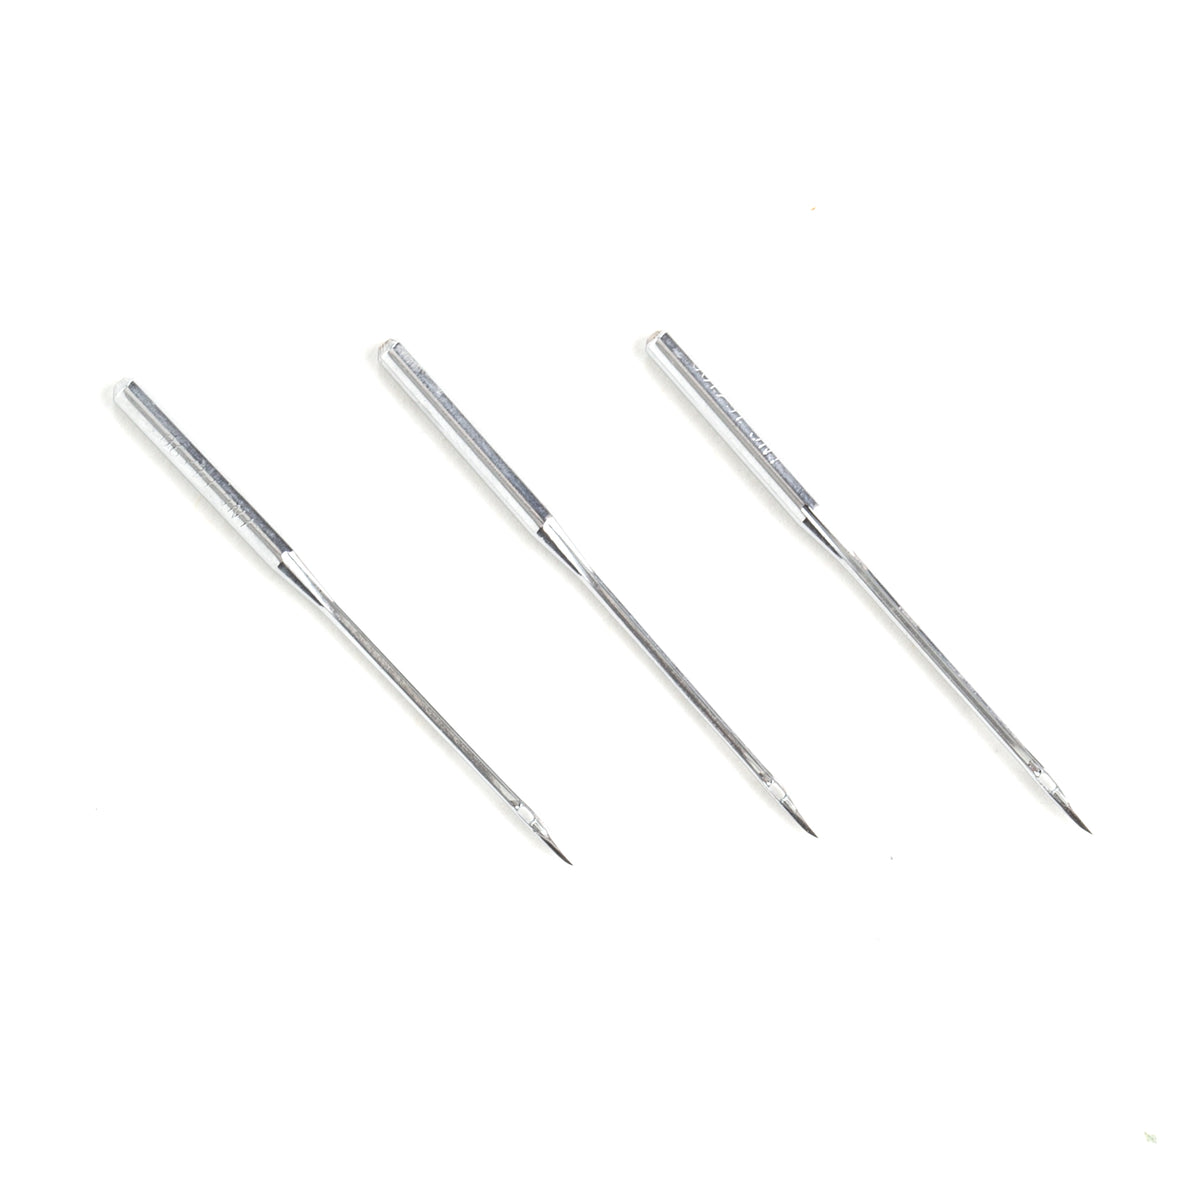 10 Needles 45x250 For Ga-5-1 Leather Sewing Machine - Sewing Tools